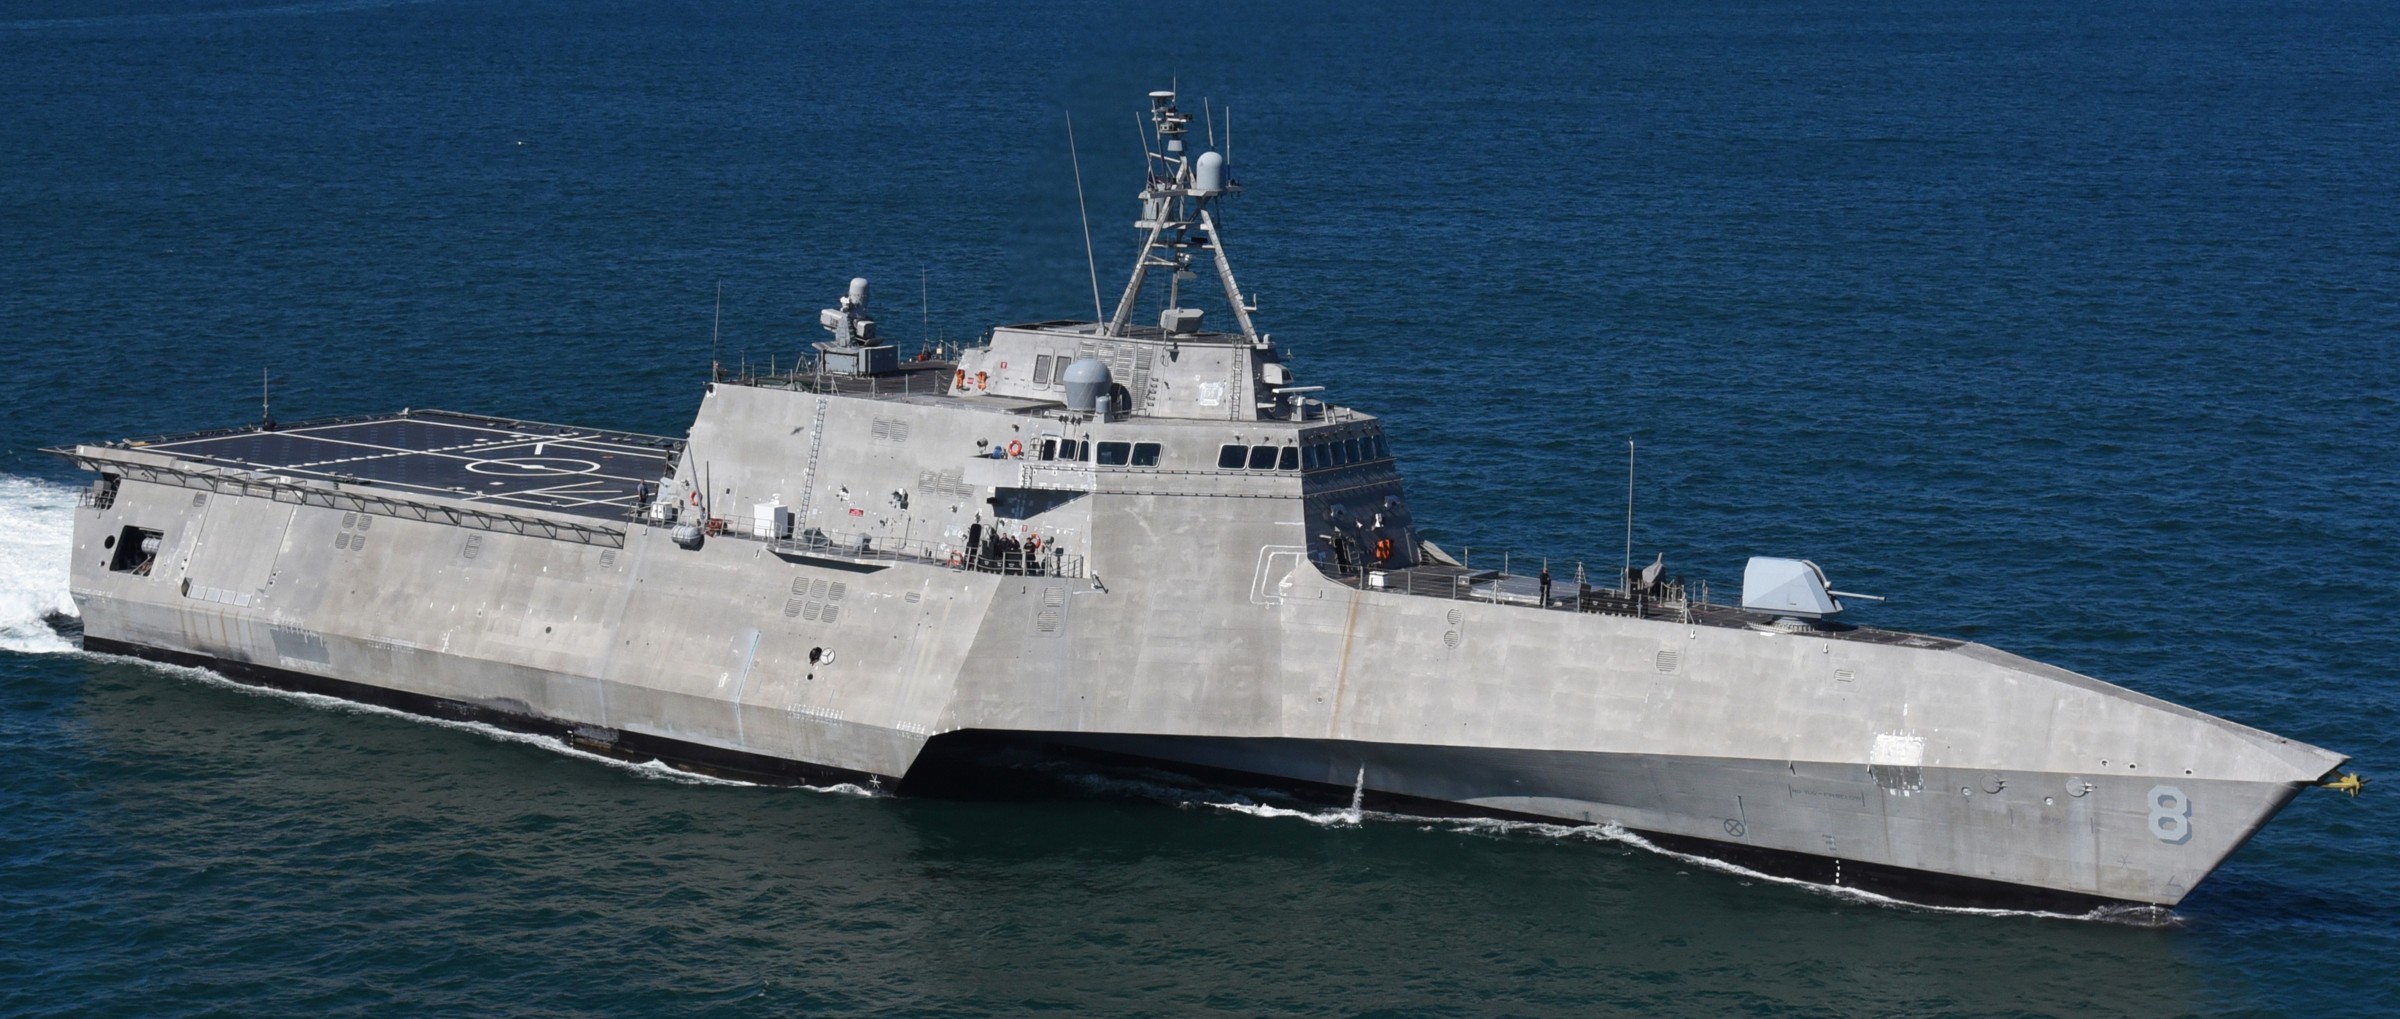 lcs-8 uss montgomery independence class littoral combat ship us navy 53 departing san diego